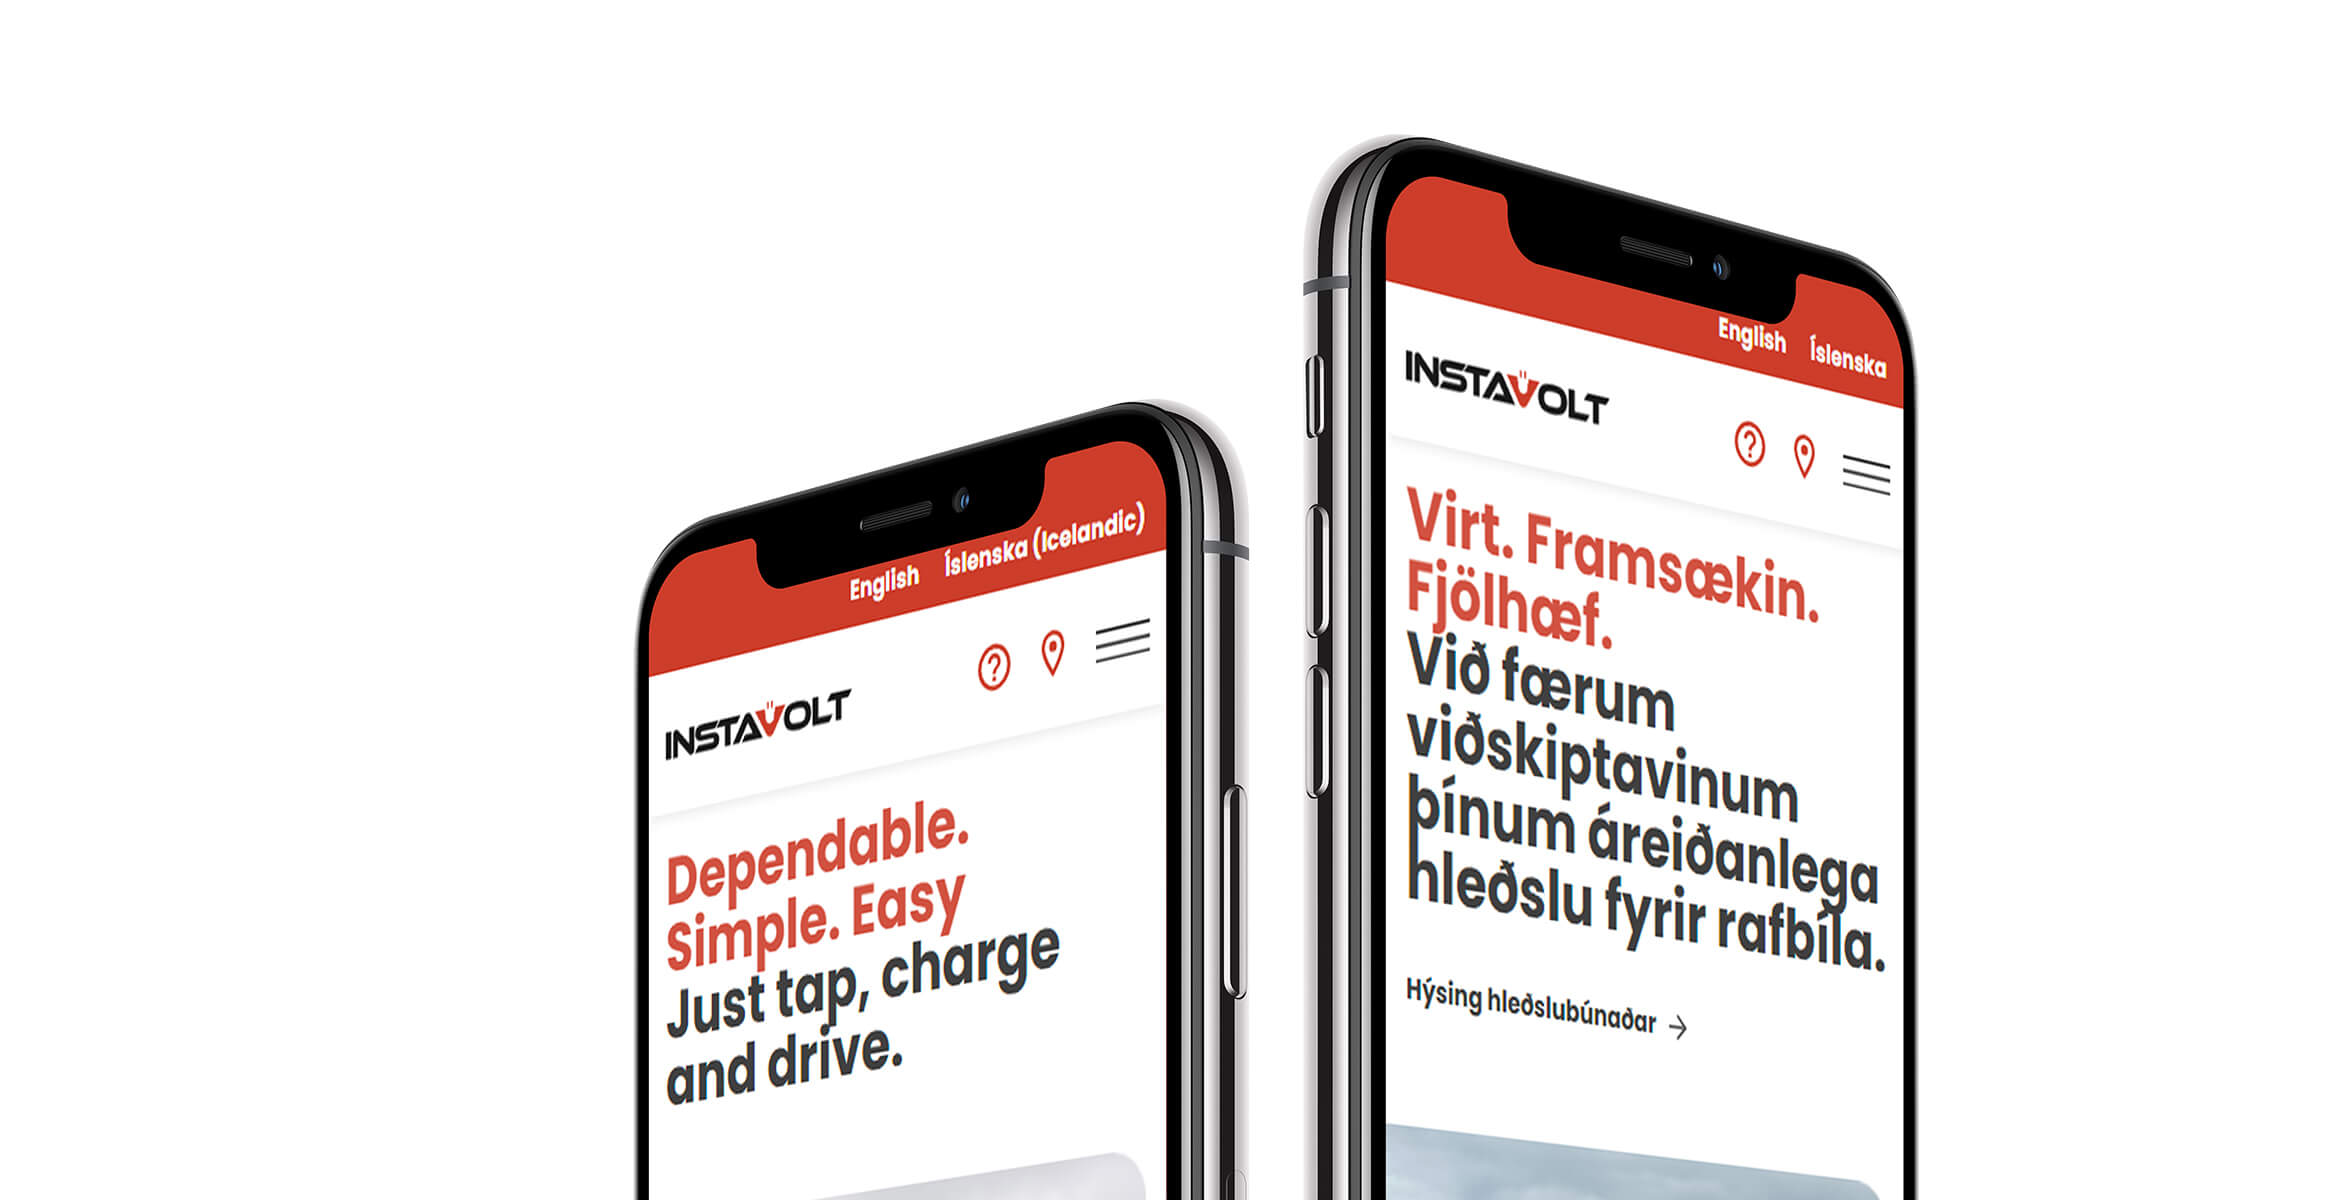 Two mobile phones showing the Instavolt site in English and then in Icelandic